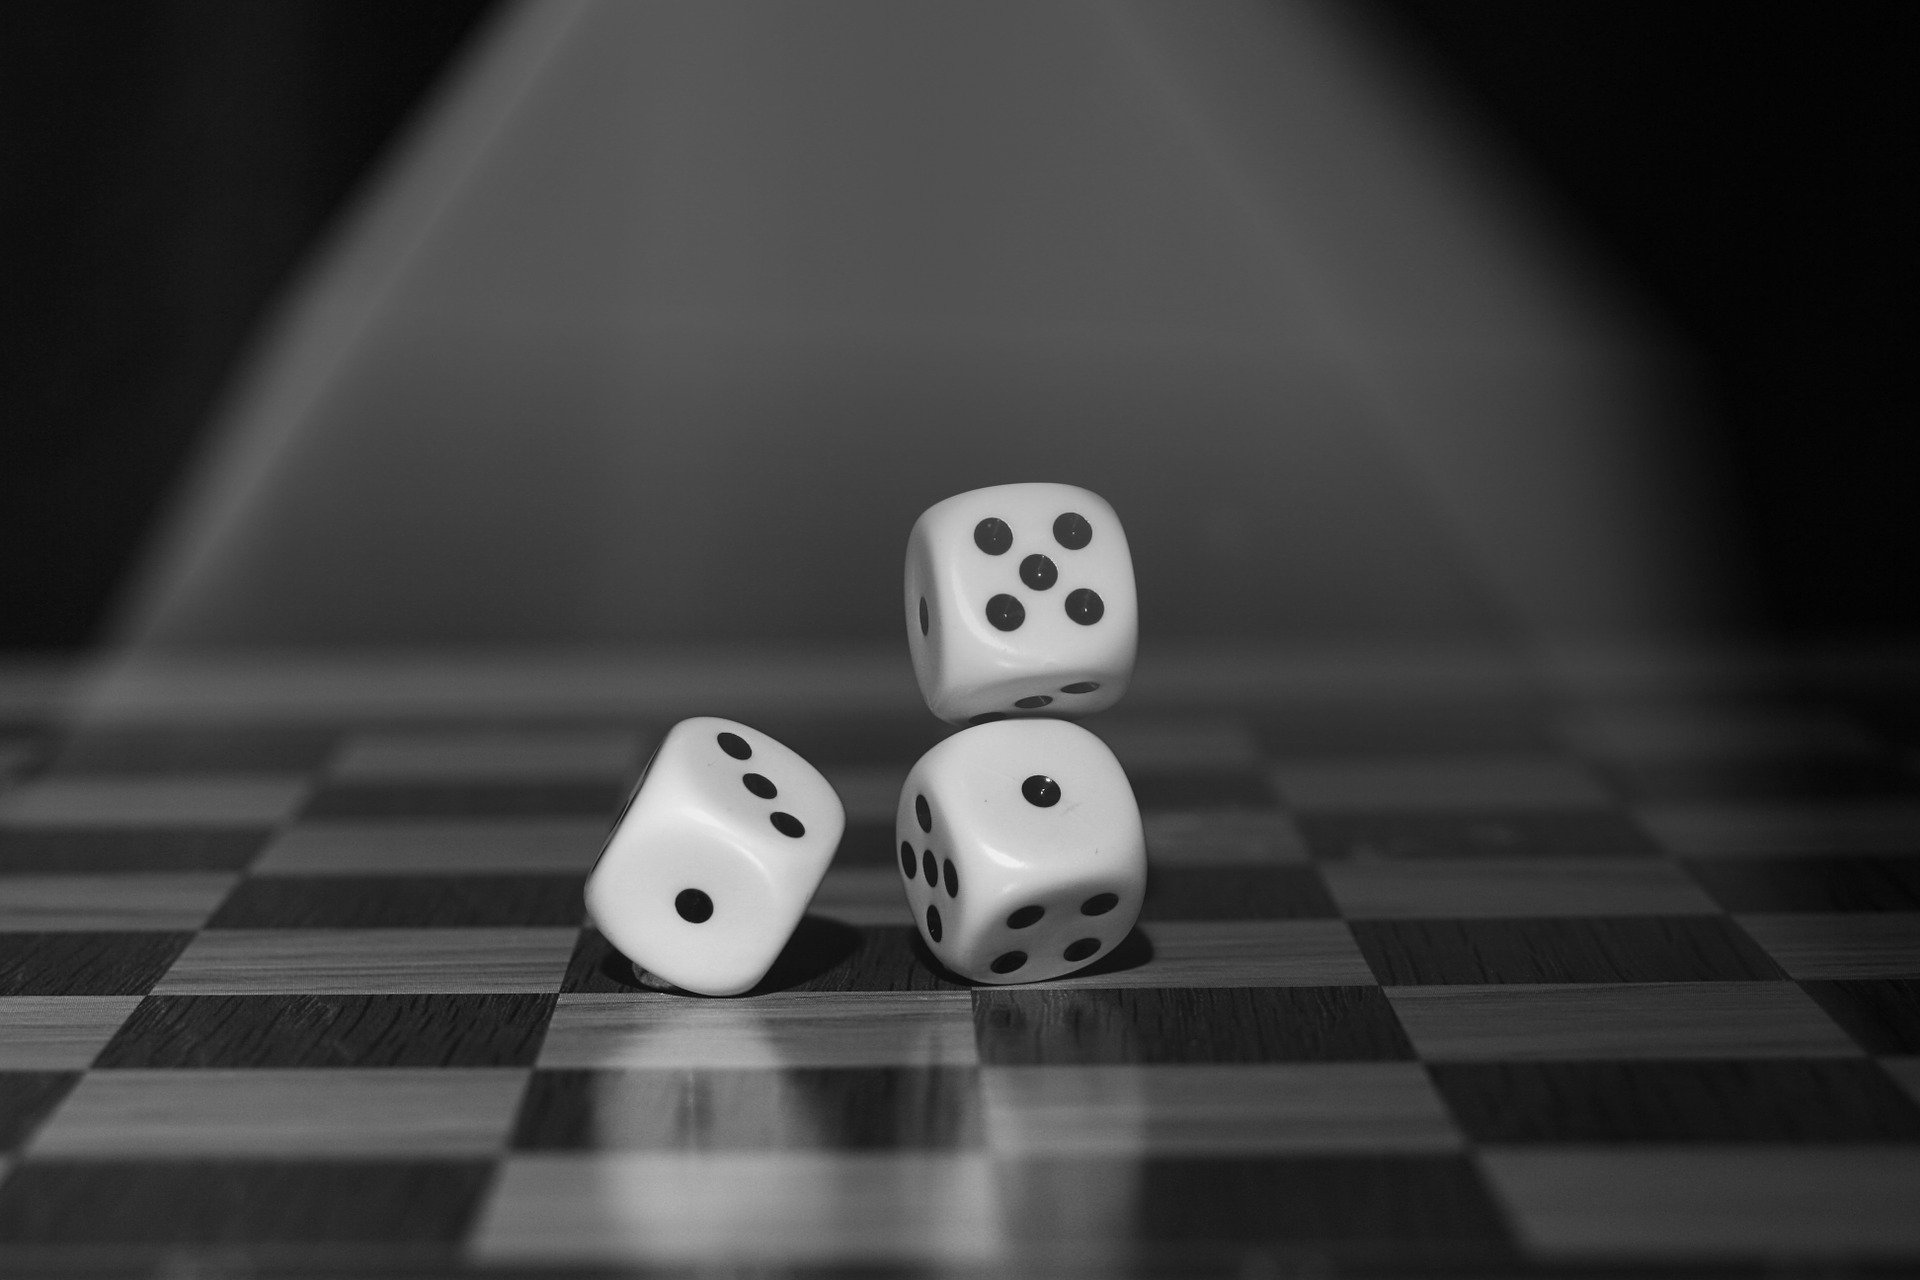 What marketers could learn from the Igaming industry?